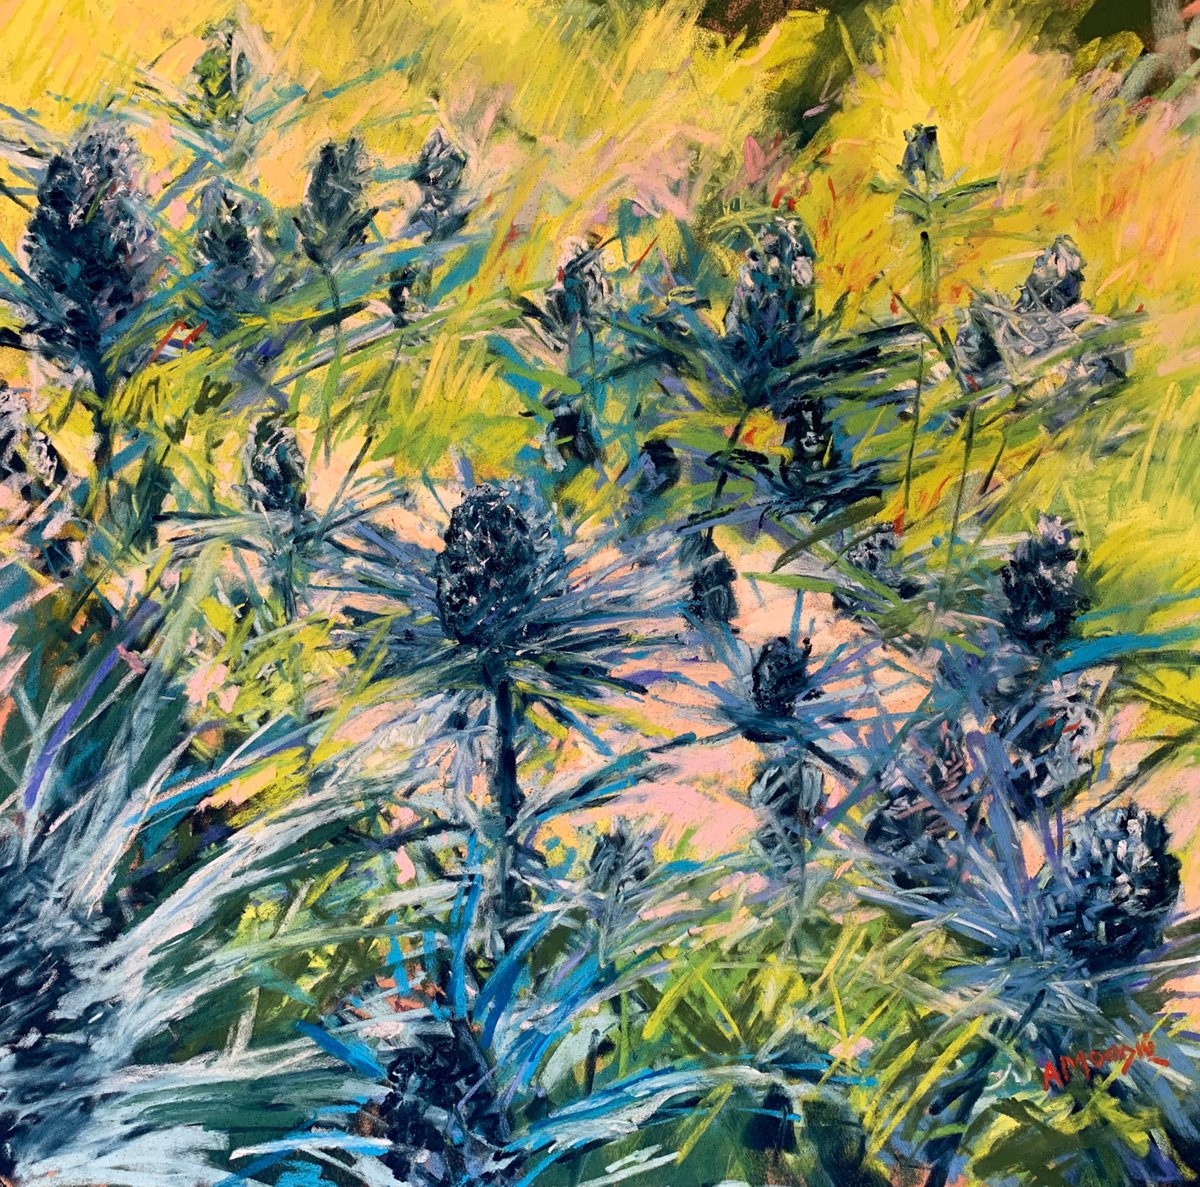 Thistles by Andrew Moodie